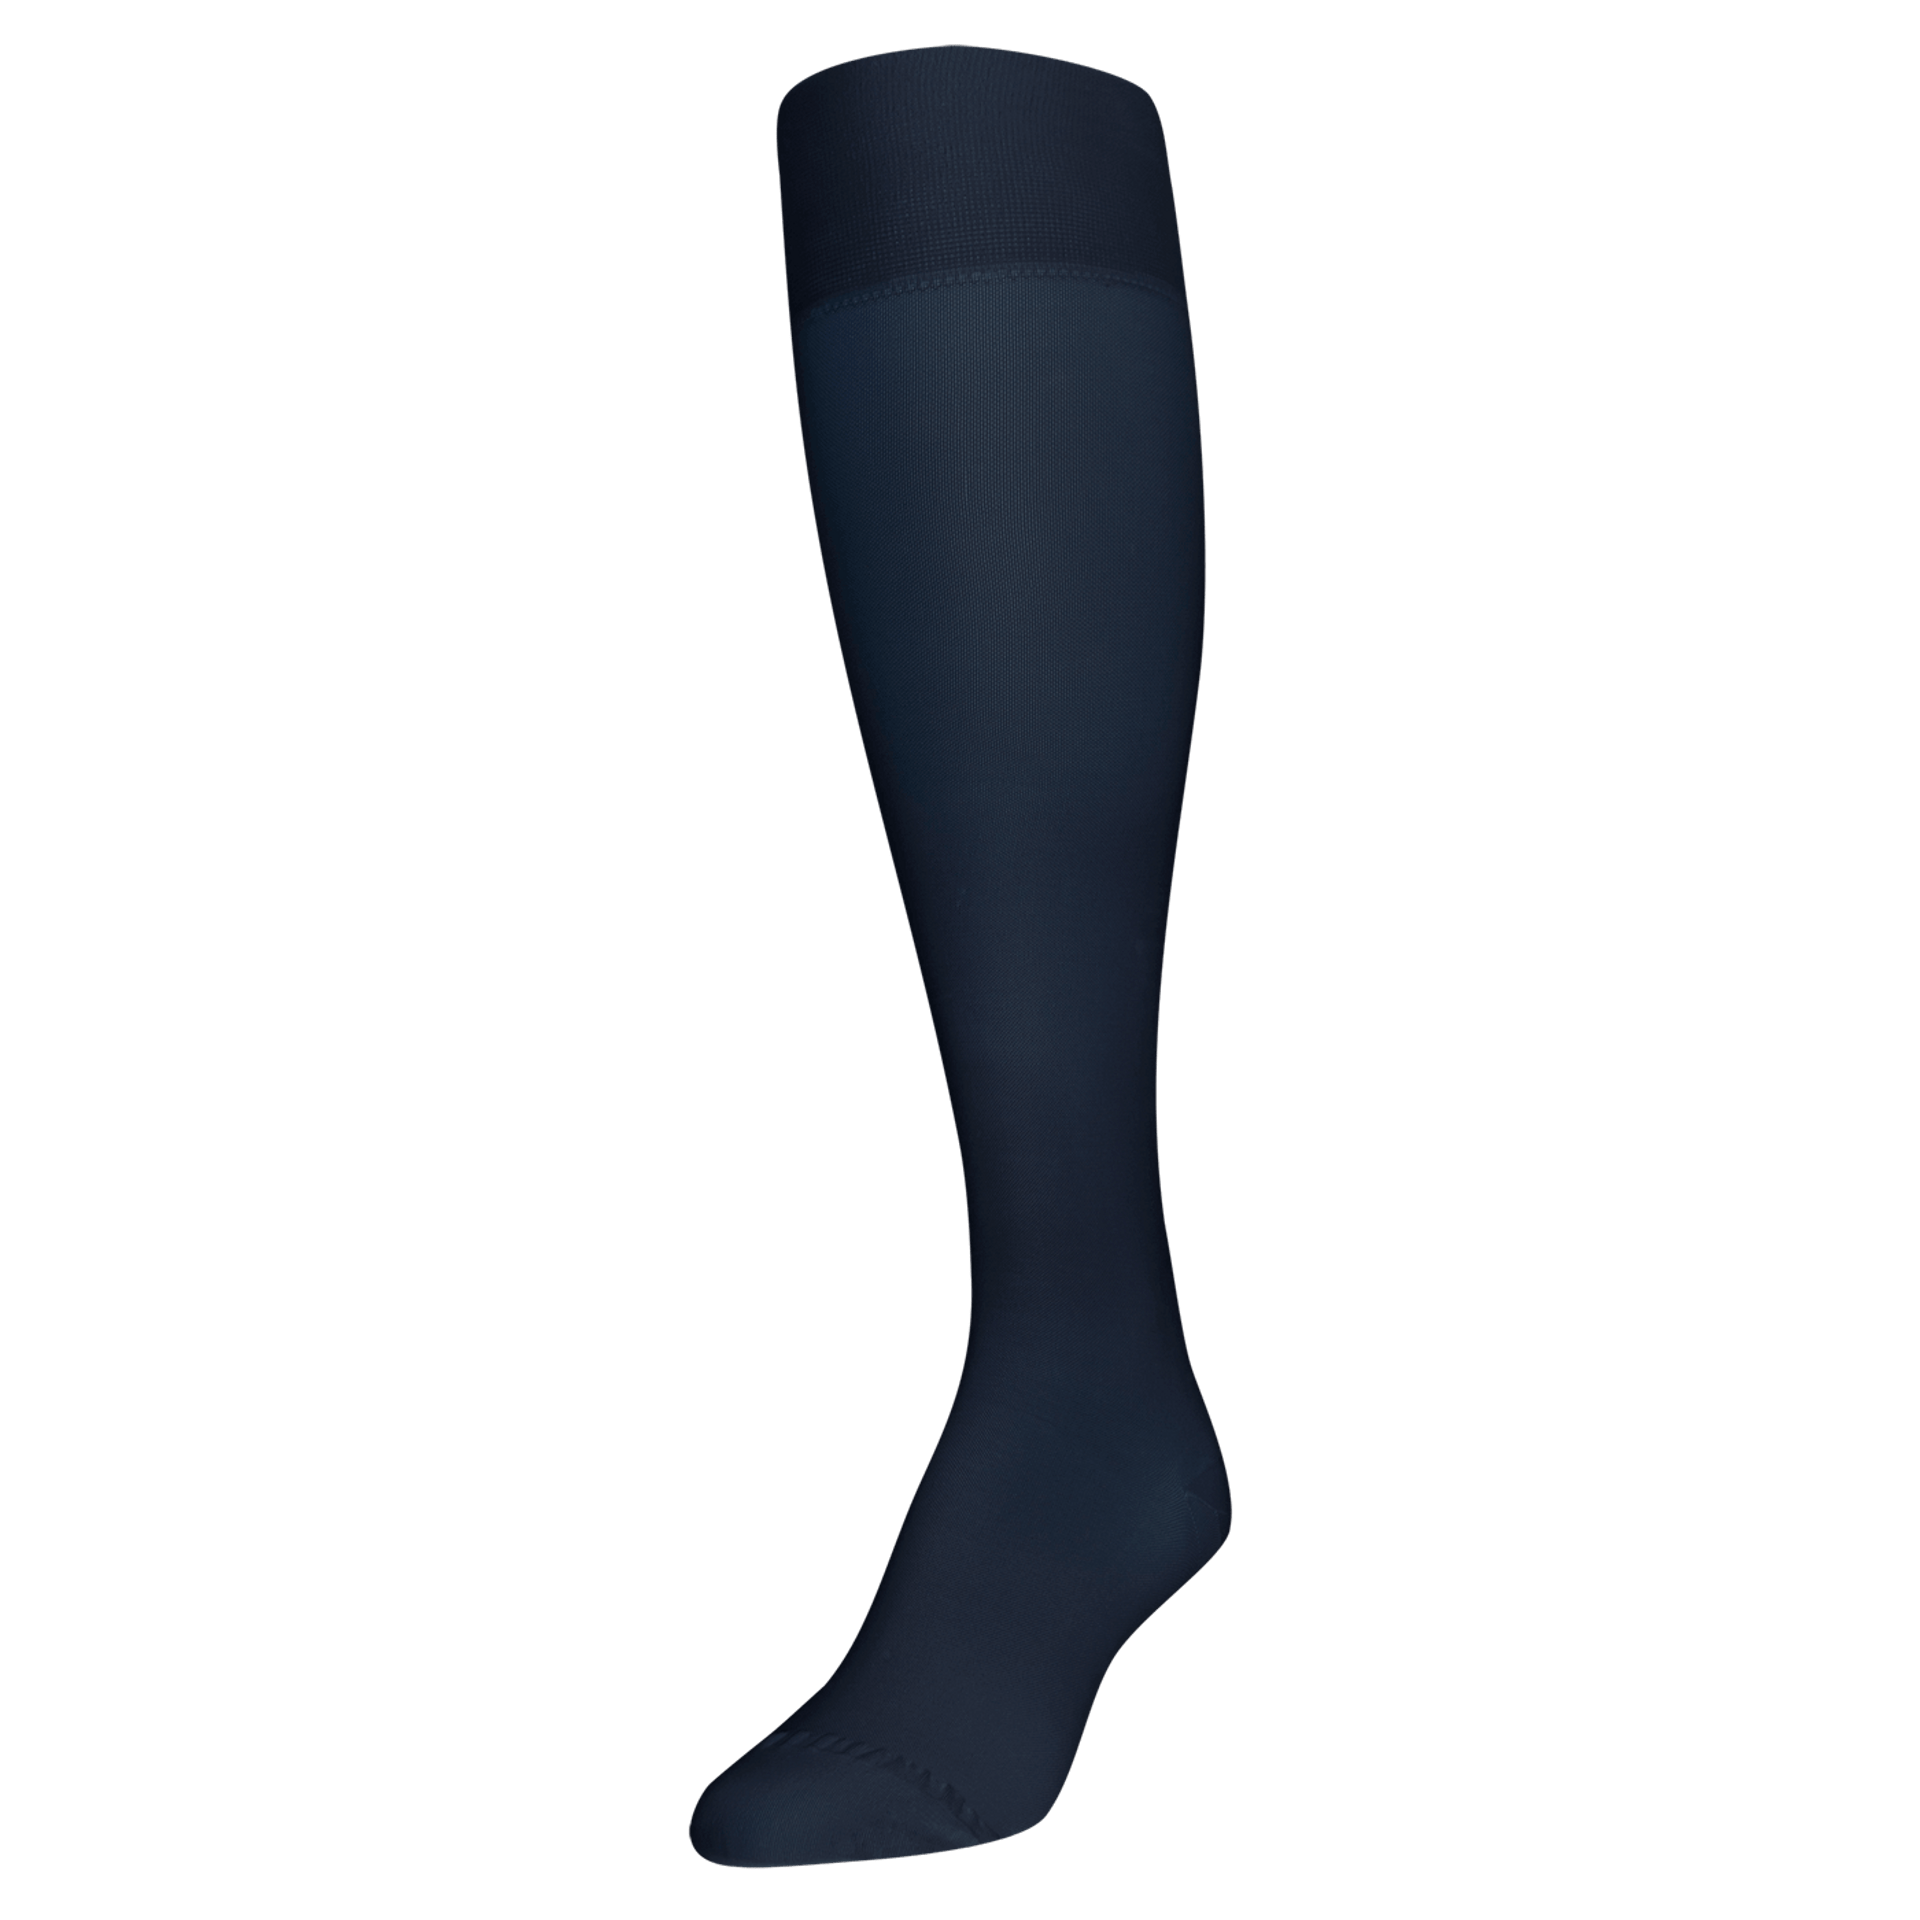 Women's Firm Compression Support Knee High